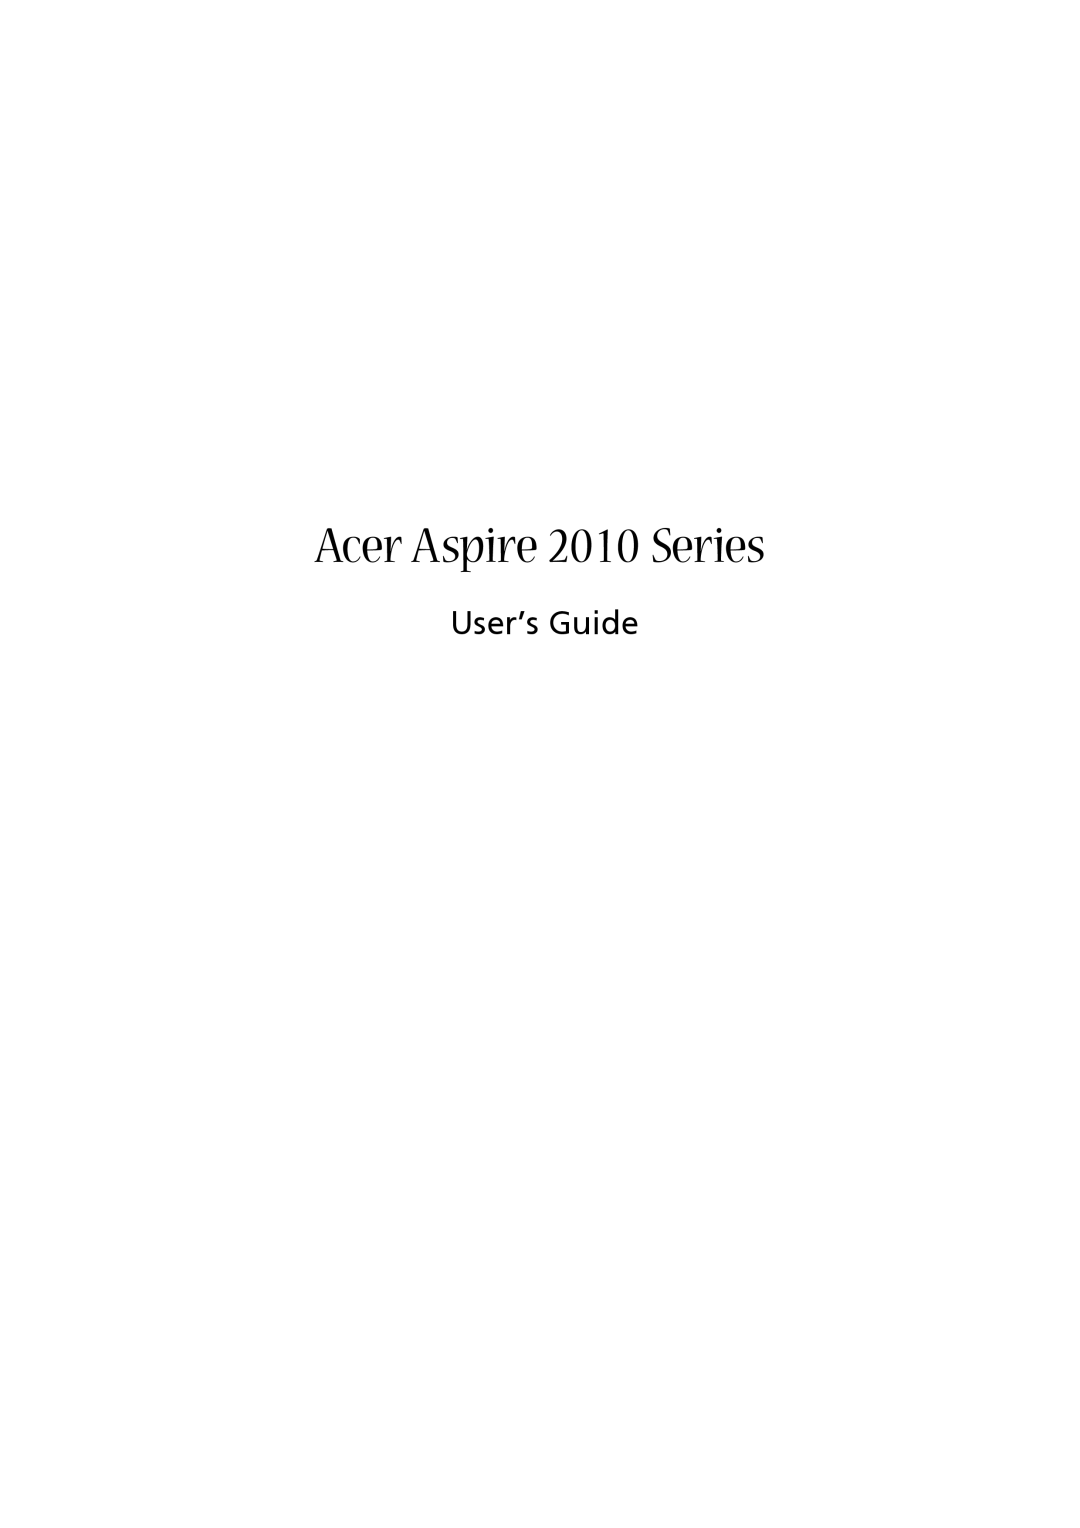 Acer manual Acer Aspire 2010 Series, User’s Guide 